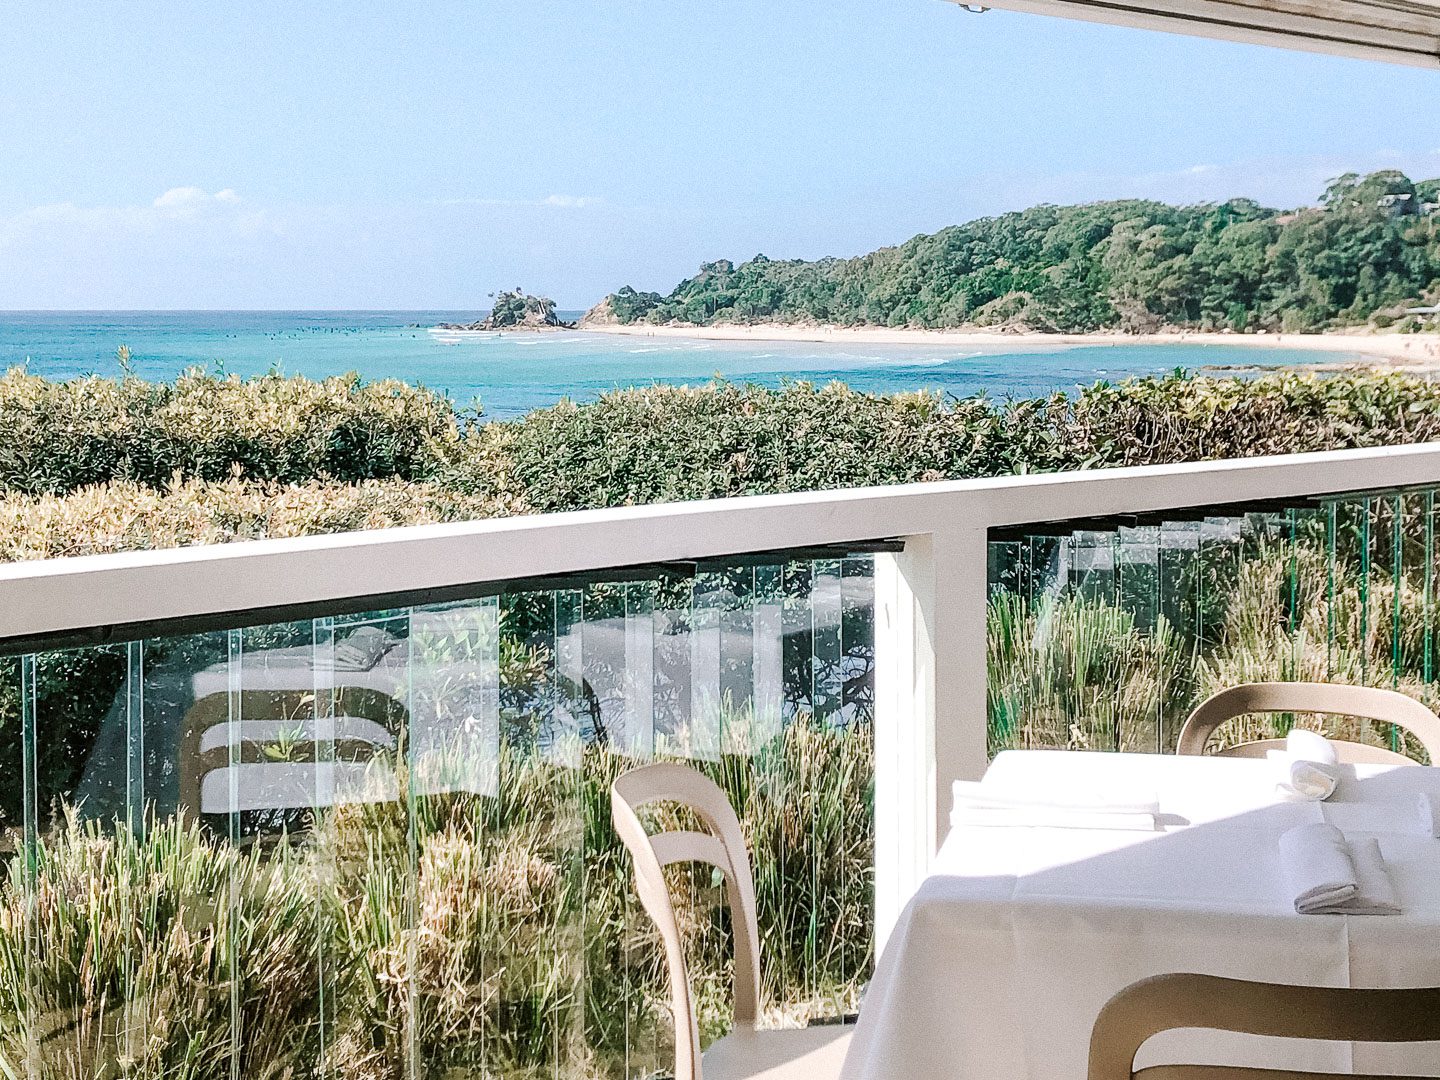 The incredible ocean views and  at the Beach Restaurant, one of the best restaurants in Byron Bay